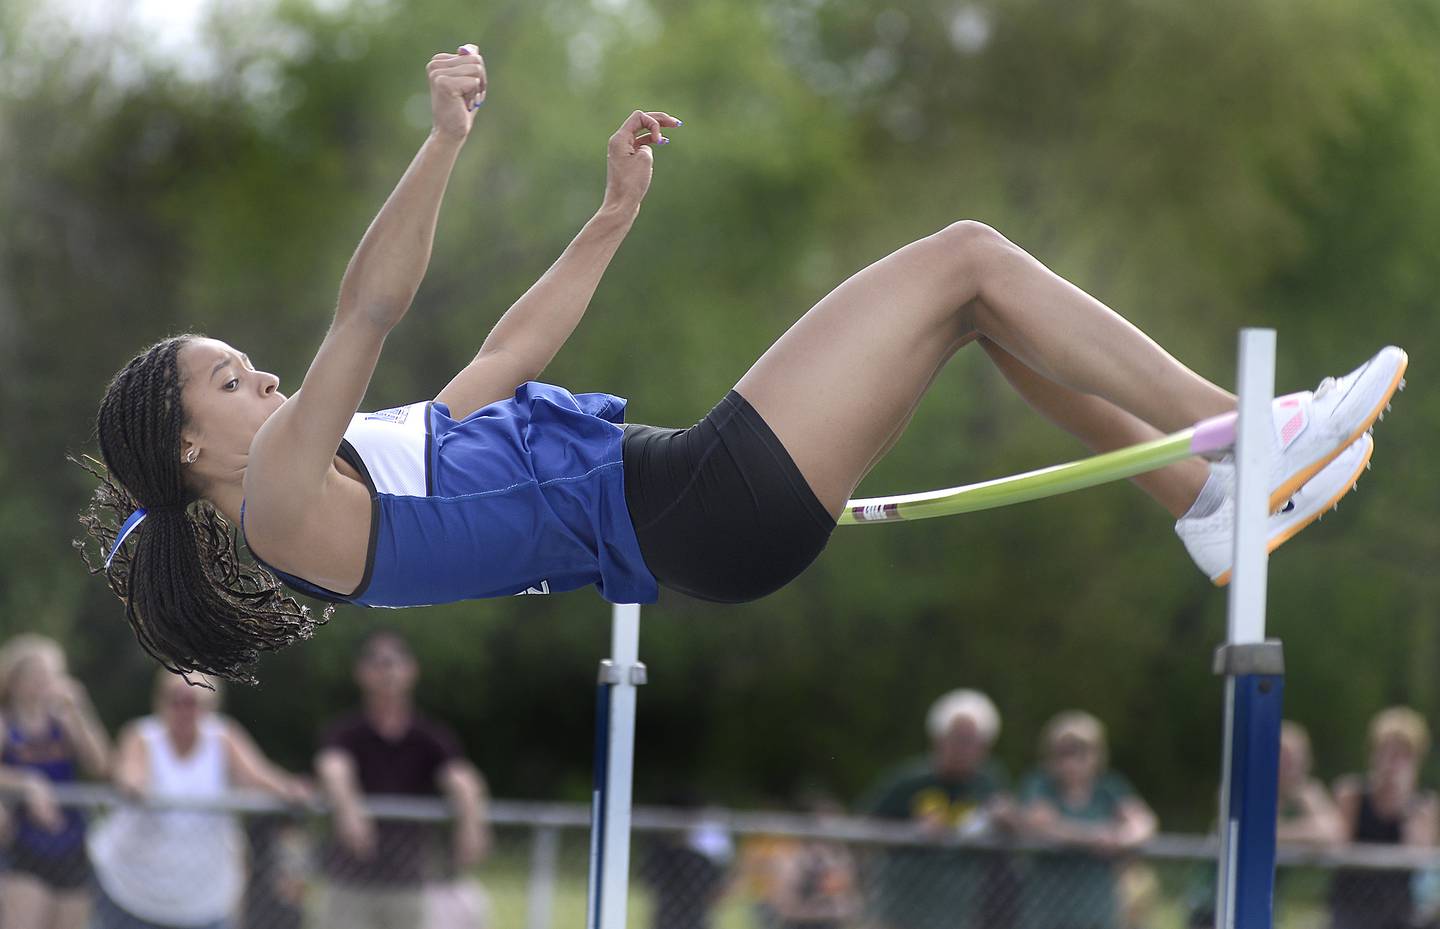 Newark’s Kiara Wesseh competes in the high jump during the Class 1A Seneca Sectional track and field meet Thursday, May 11, 2023, at Seneca High School.